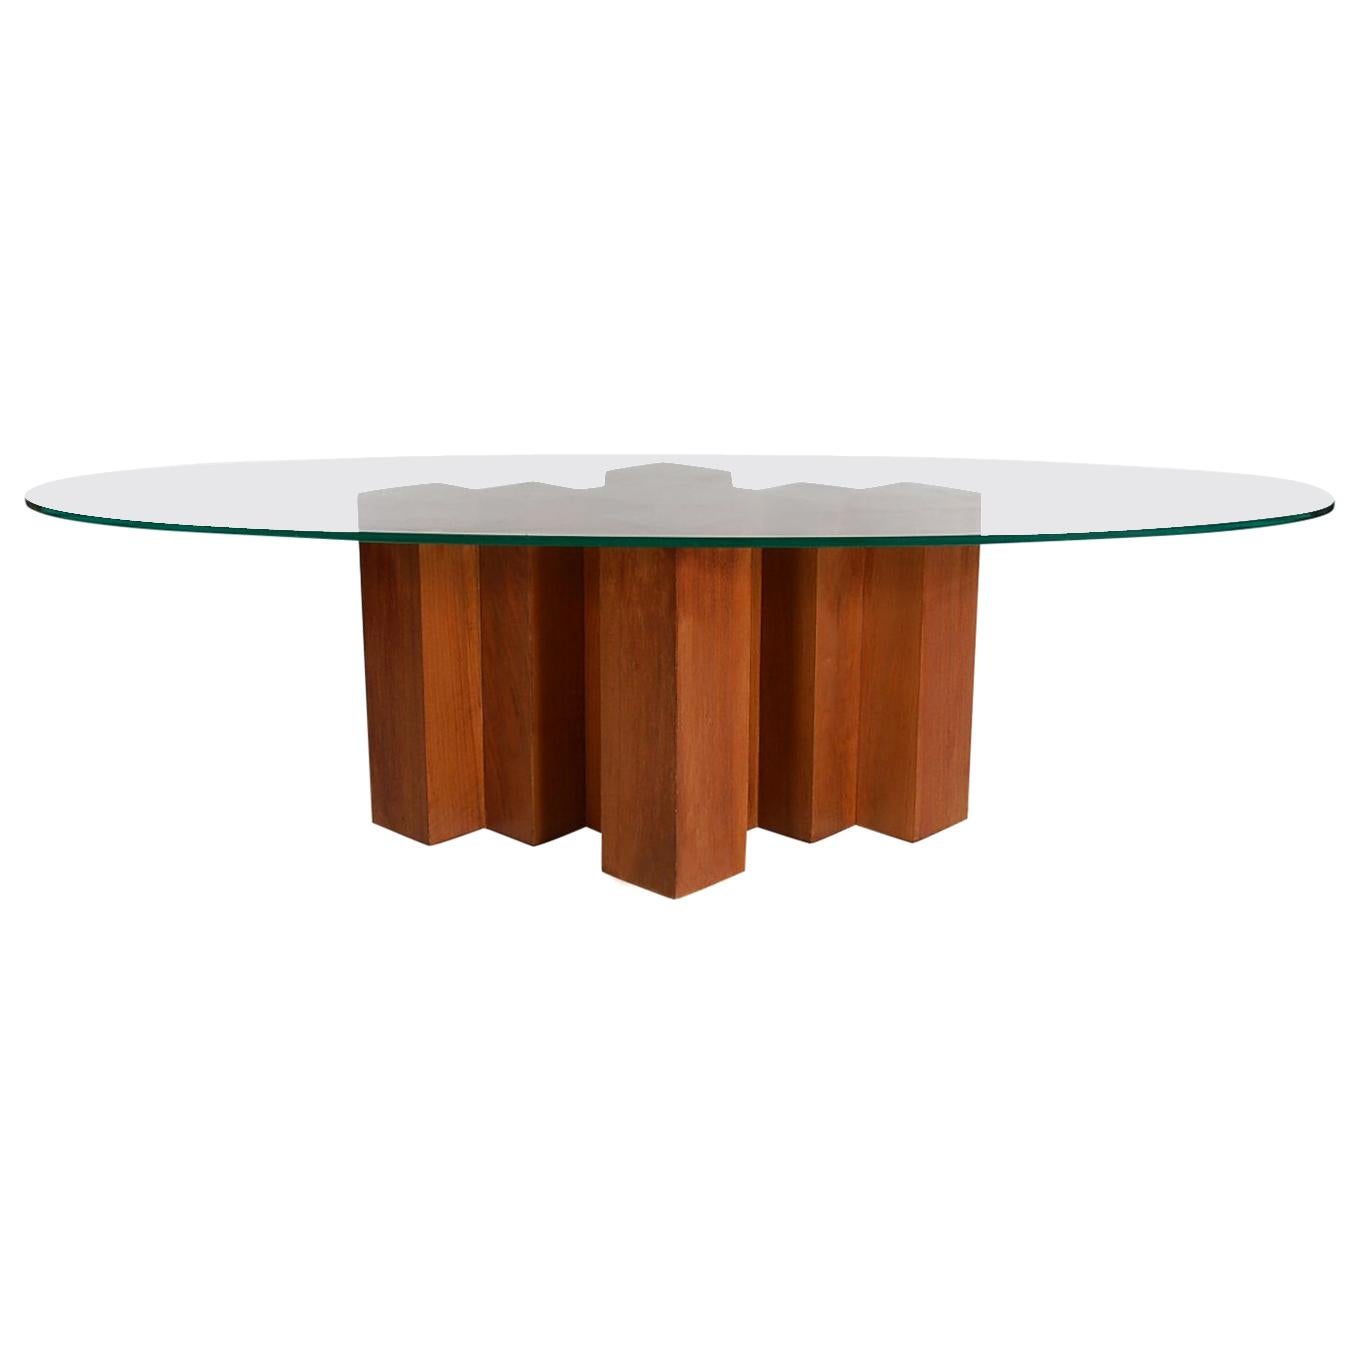 Midcentury Danish Modern Walnut and Oval Glass Cocktail Table in Art Deco Form For Sale